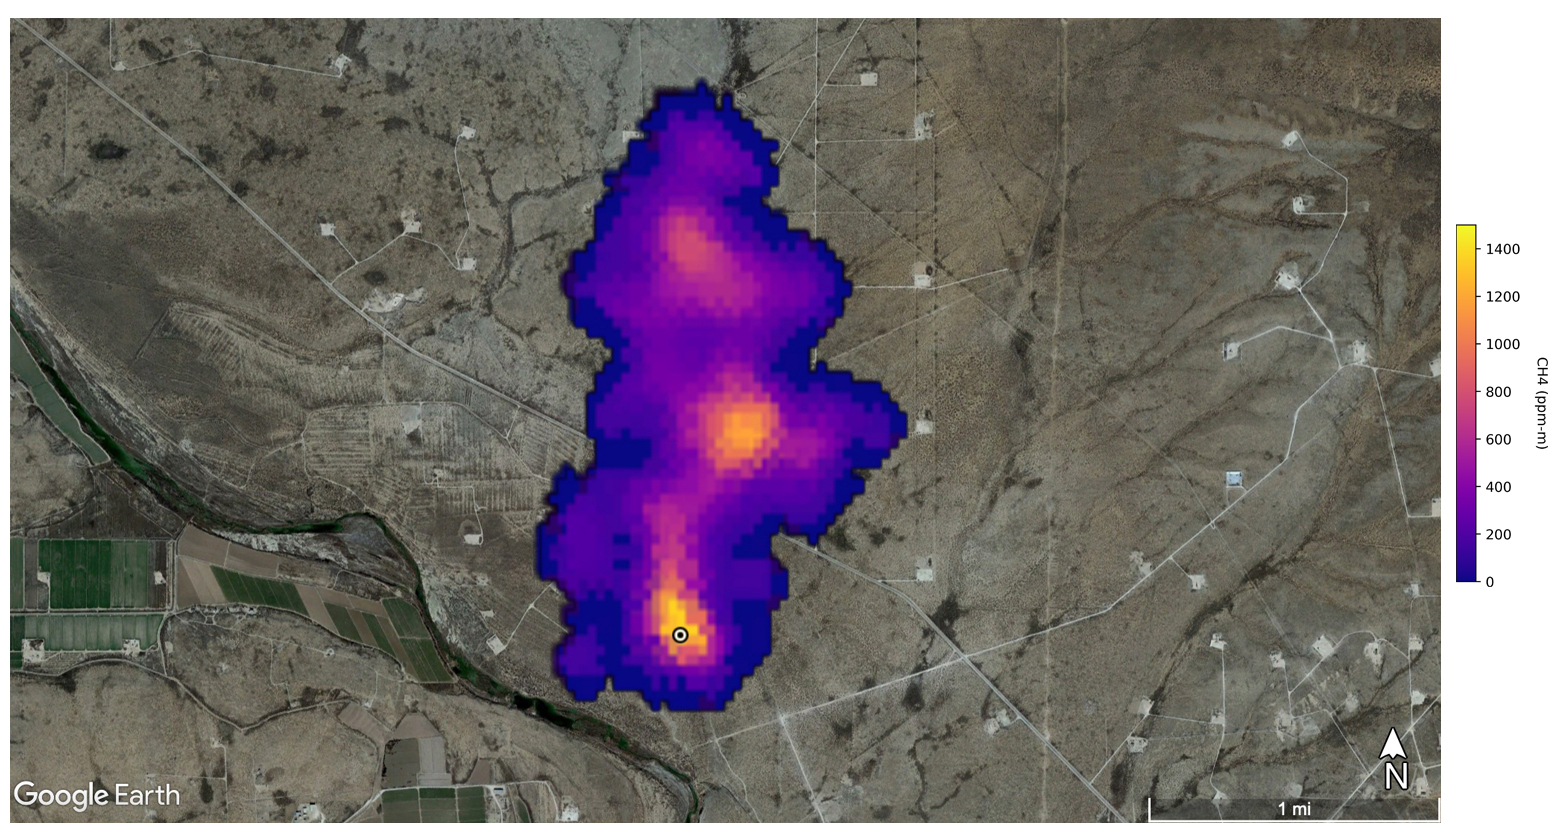 NM Environment Review: Methane plume discovered near Carlsbad